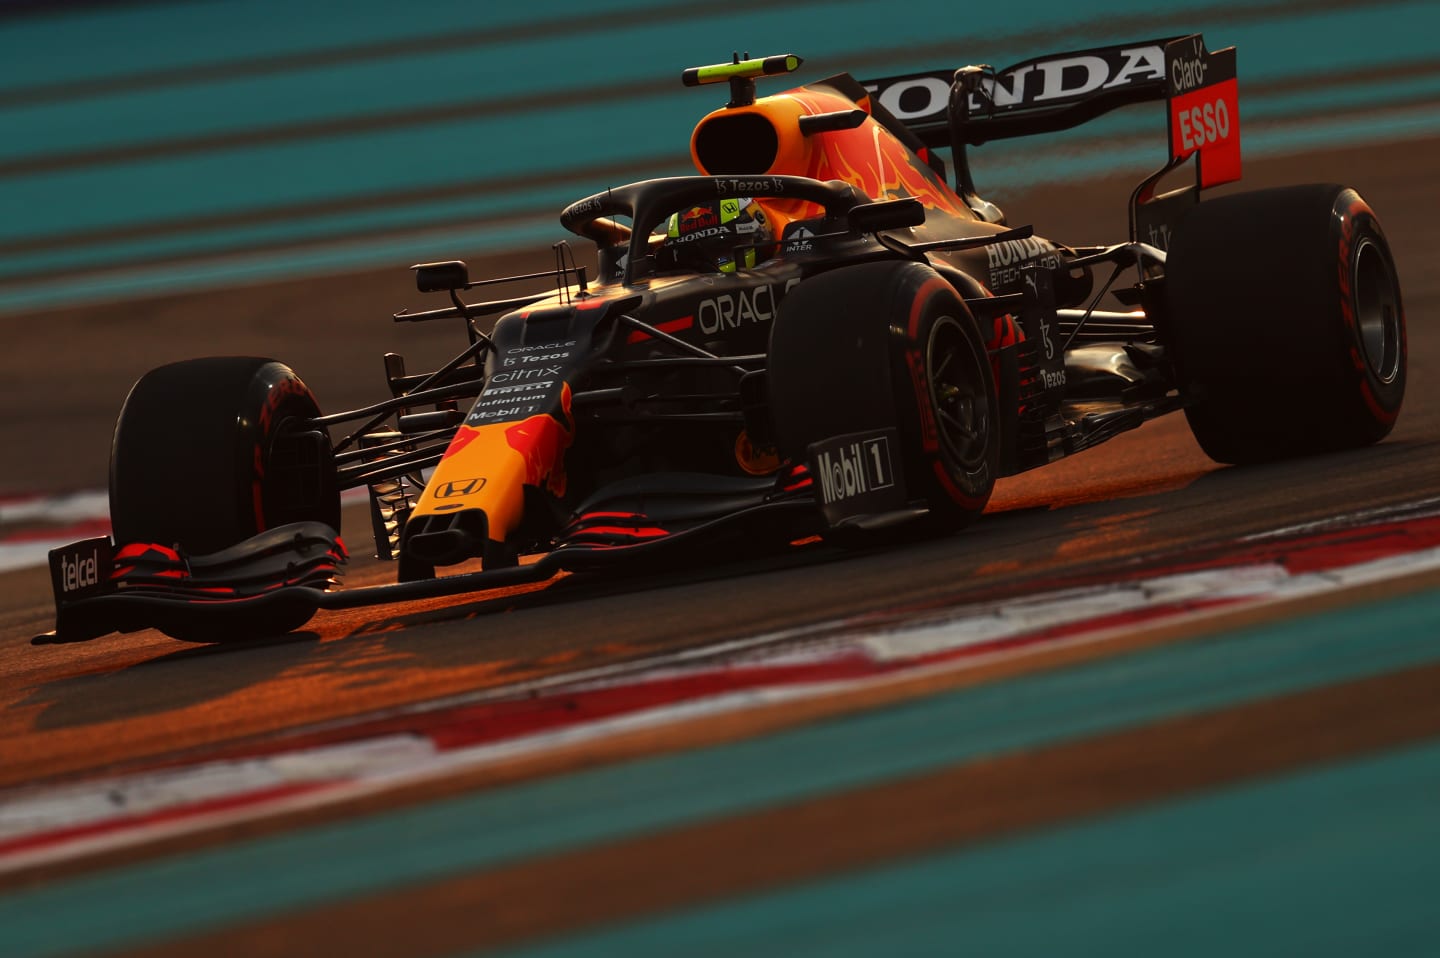 ABU DHABI, UNITED ARAB EMIRATES - DECEMBER 11: Sergio Perez of Mexico driving the (11) Red Bull Racing RB16B Honda during qualifying ahead of the F1 Grand Prix of Abu Dhabi at Yas Marina Circuit on December 11, 2021 in Abu Dhabi, United Arab Emirates. (Photo by Clive Rose/Getty Images)